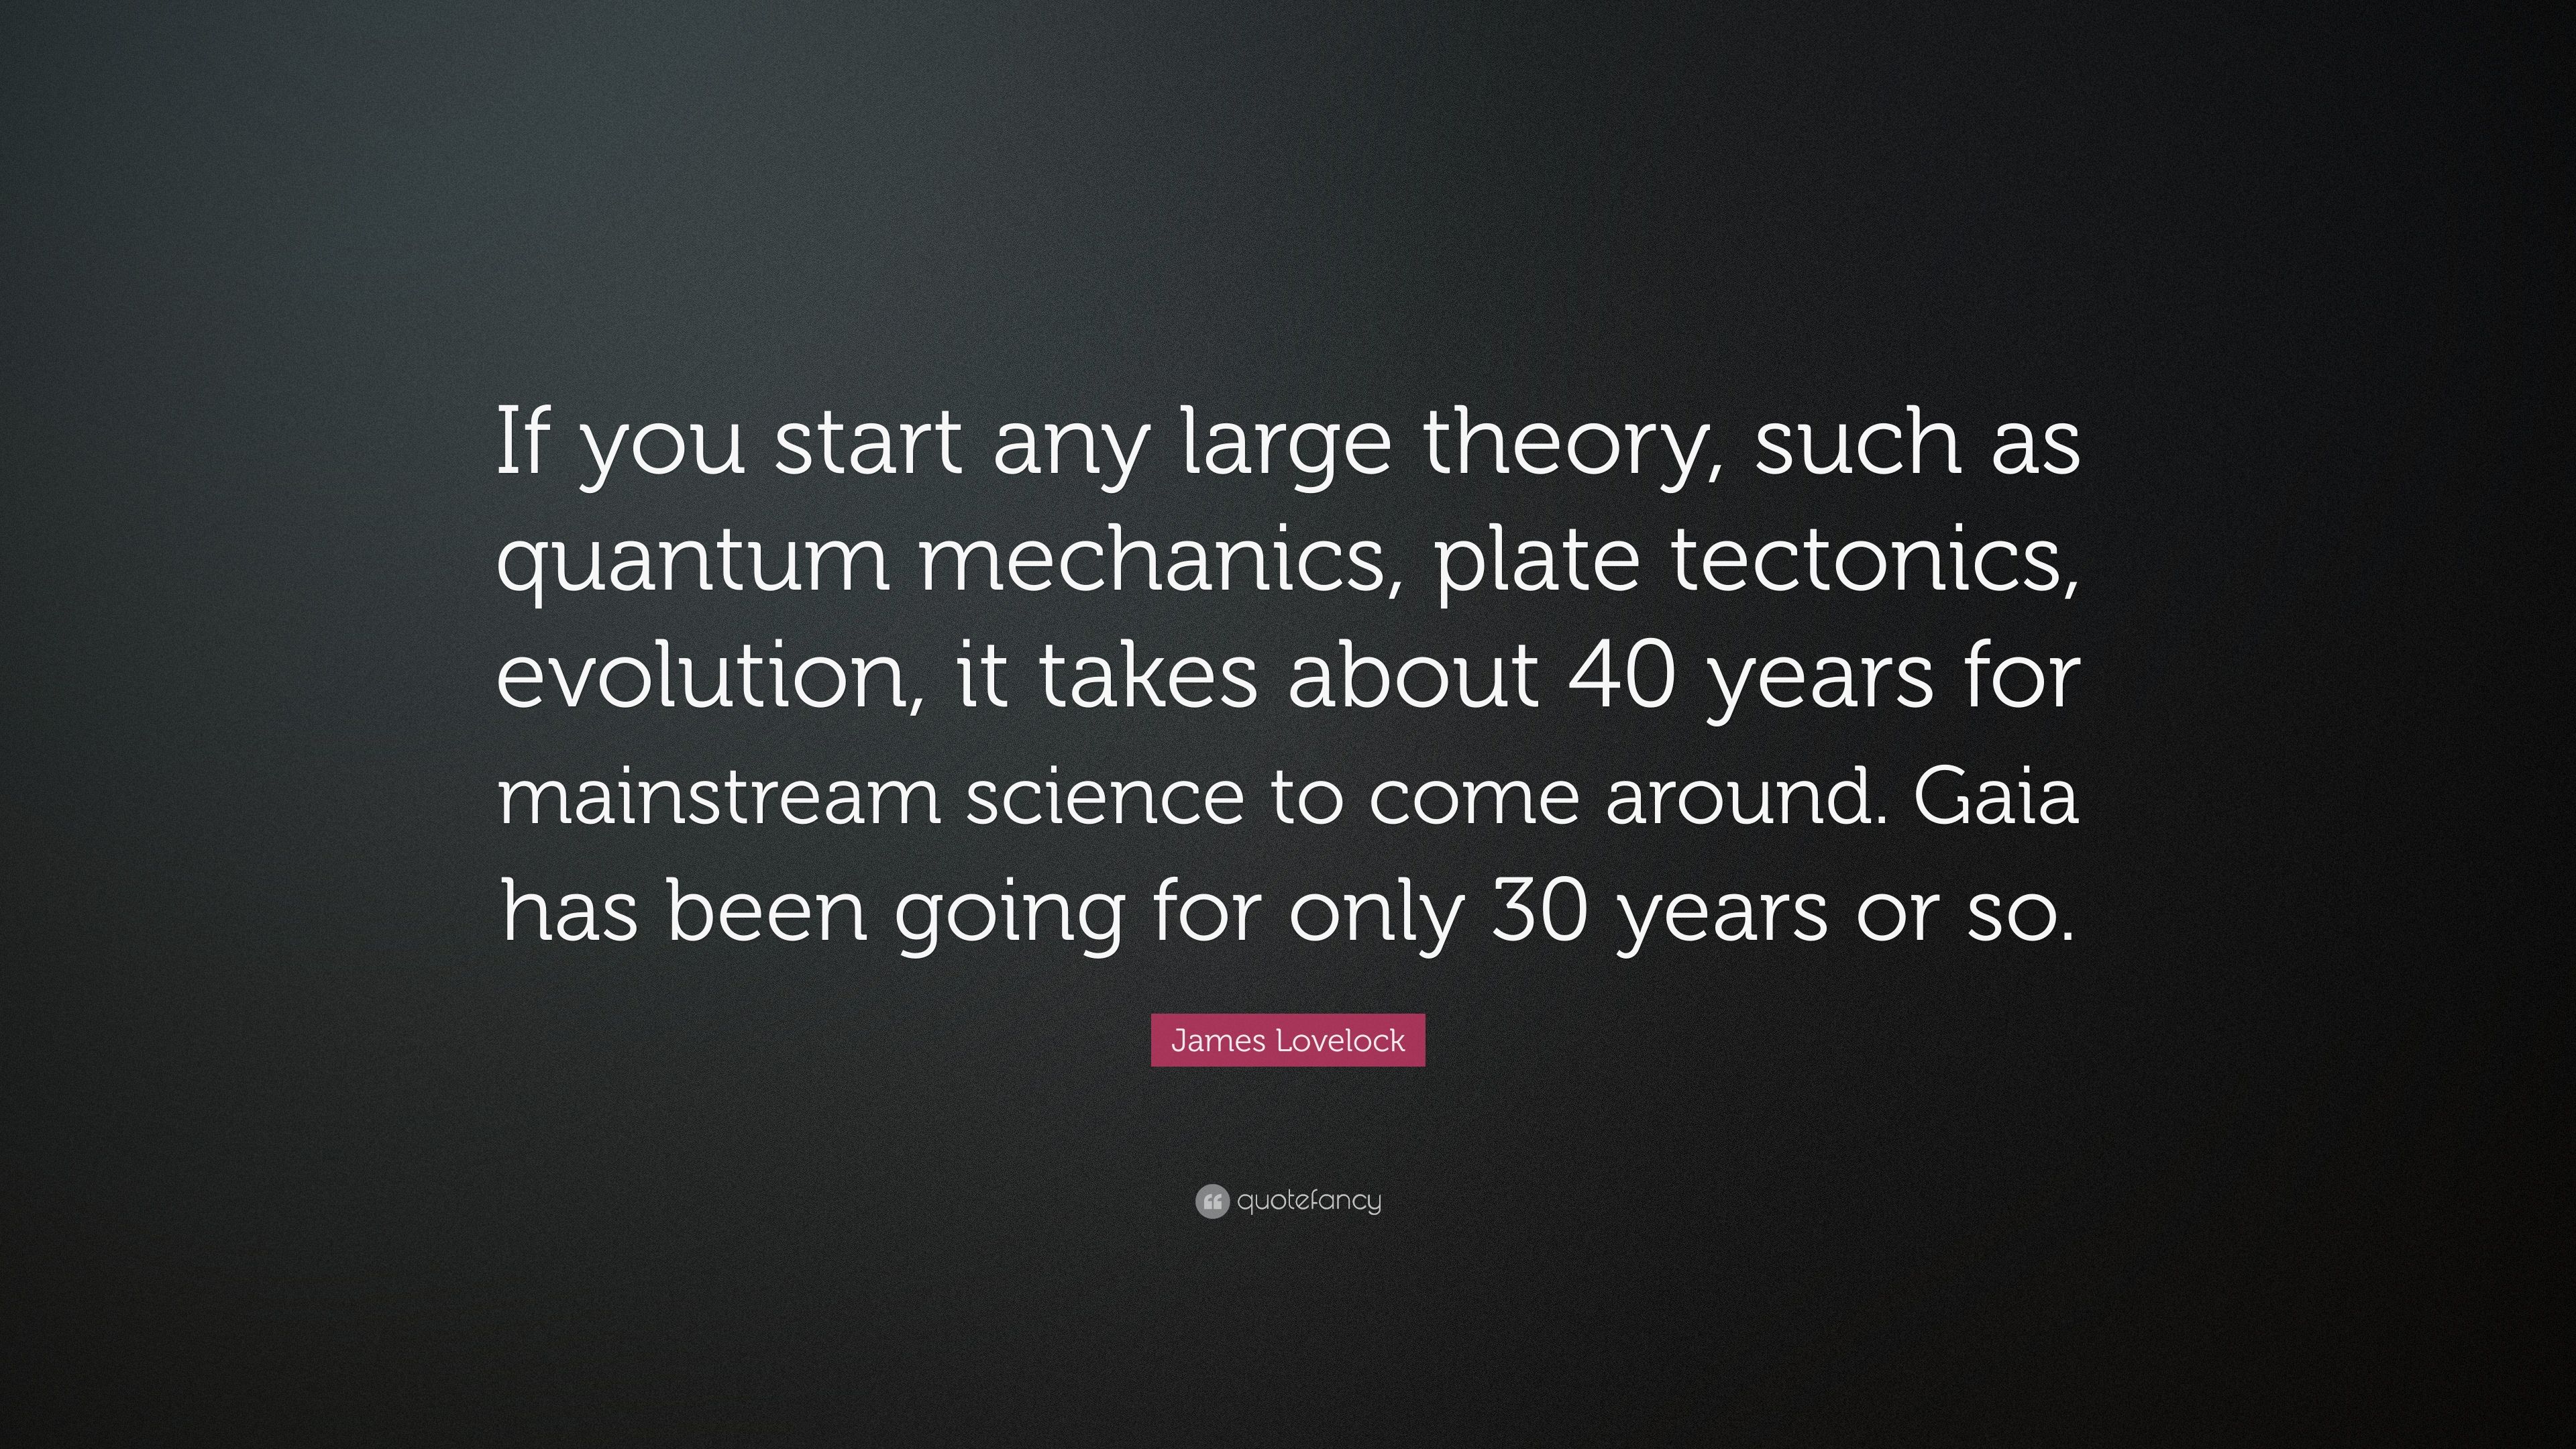 James Lovelock Quote: “If you start any large theory, such as